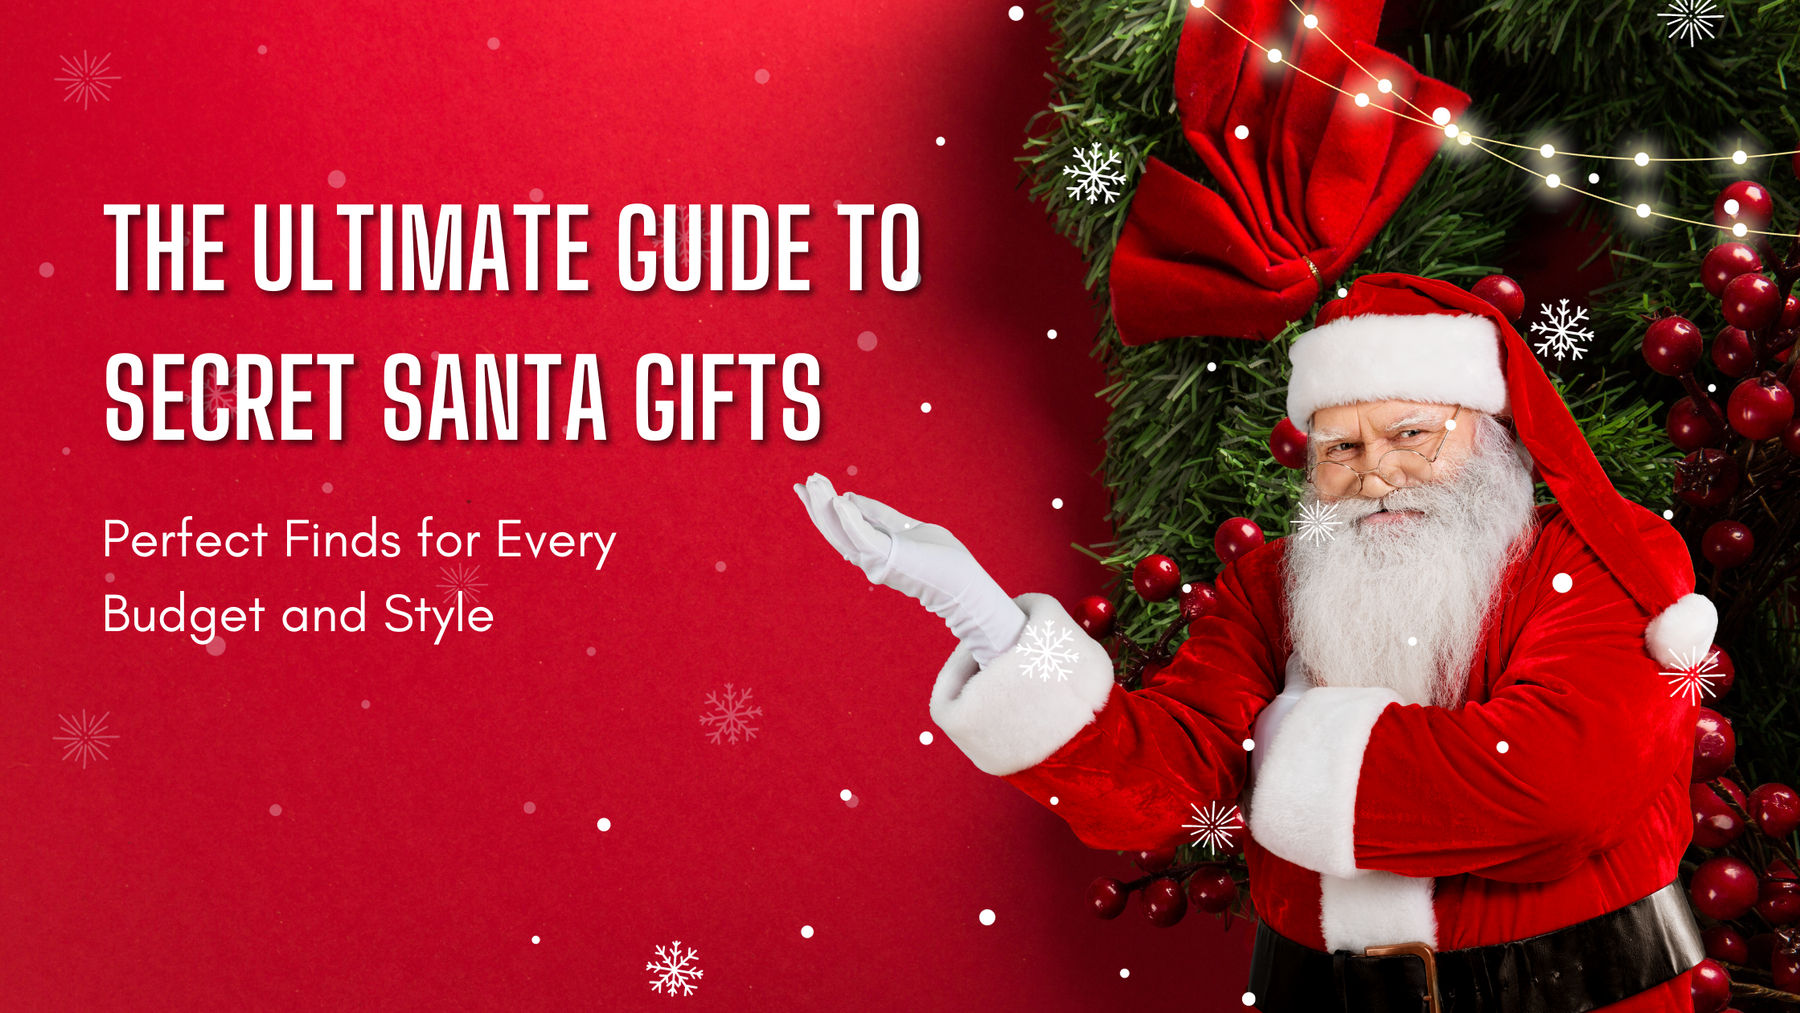 The Ultimate Guide to Secret Santa Gifts: Perfect Finds for Every Budget and Style